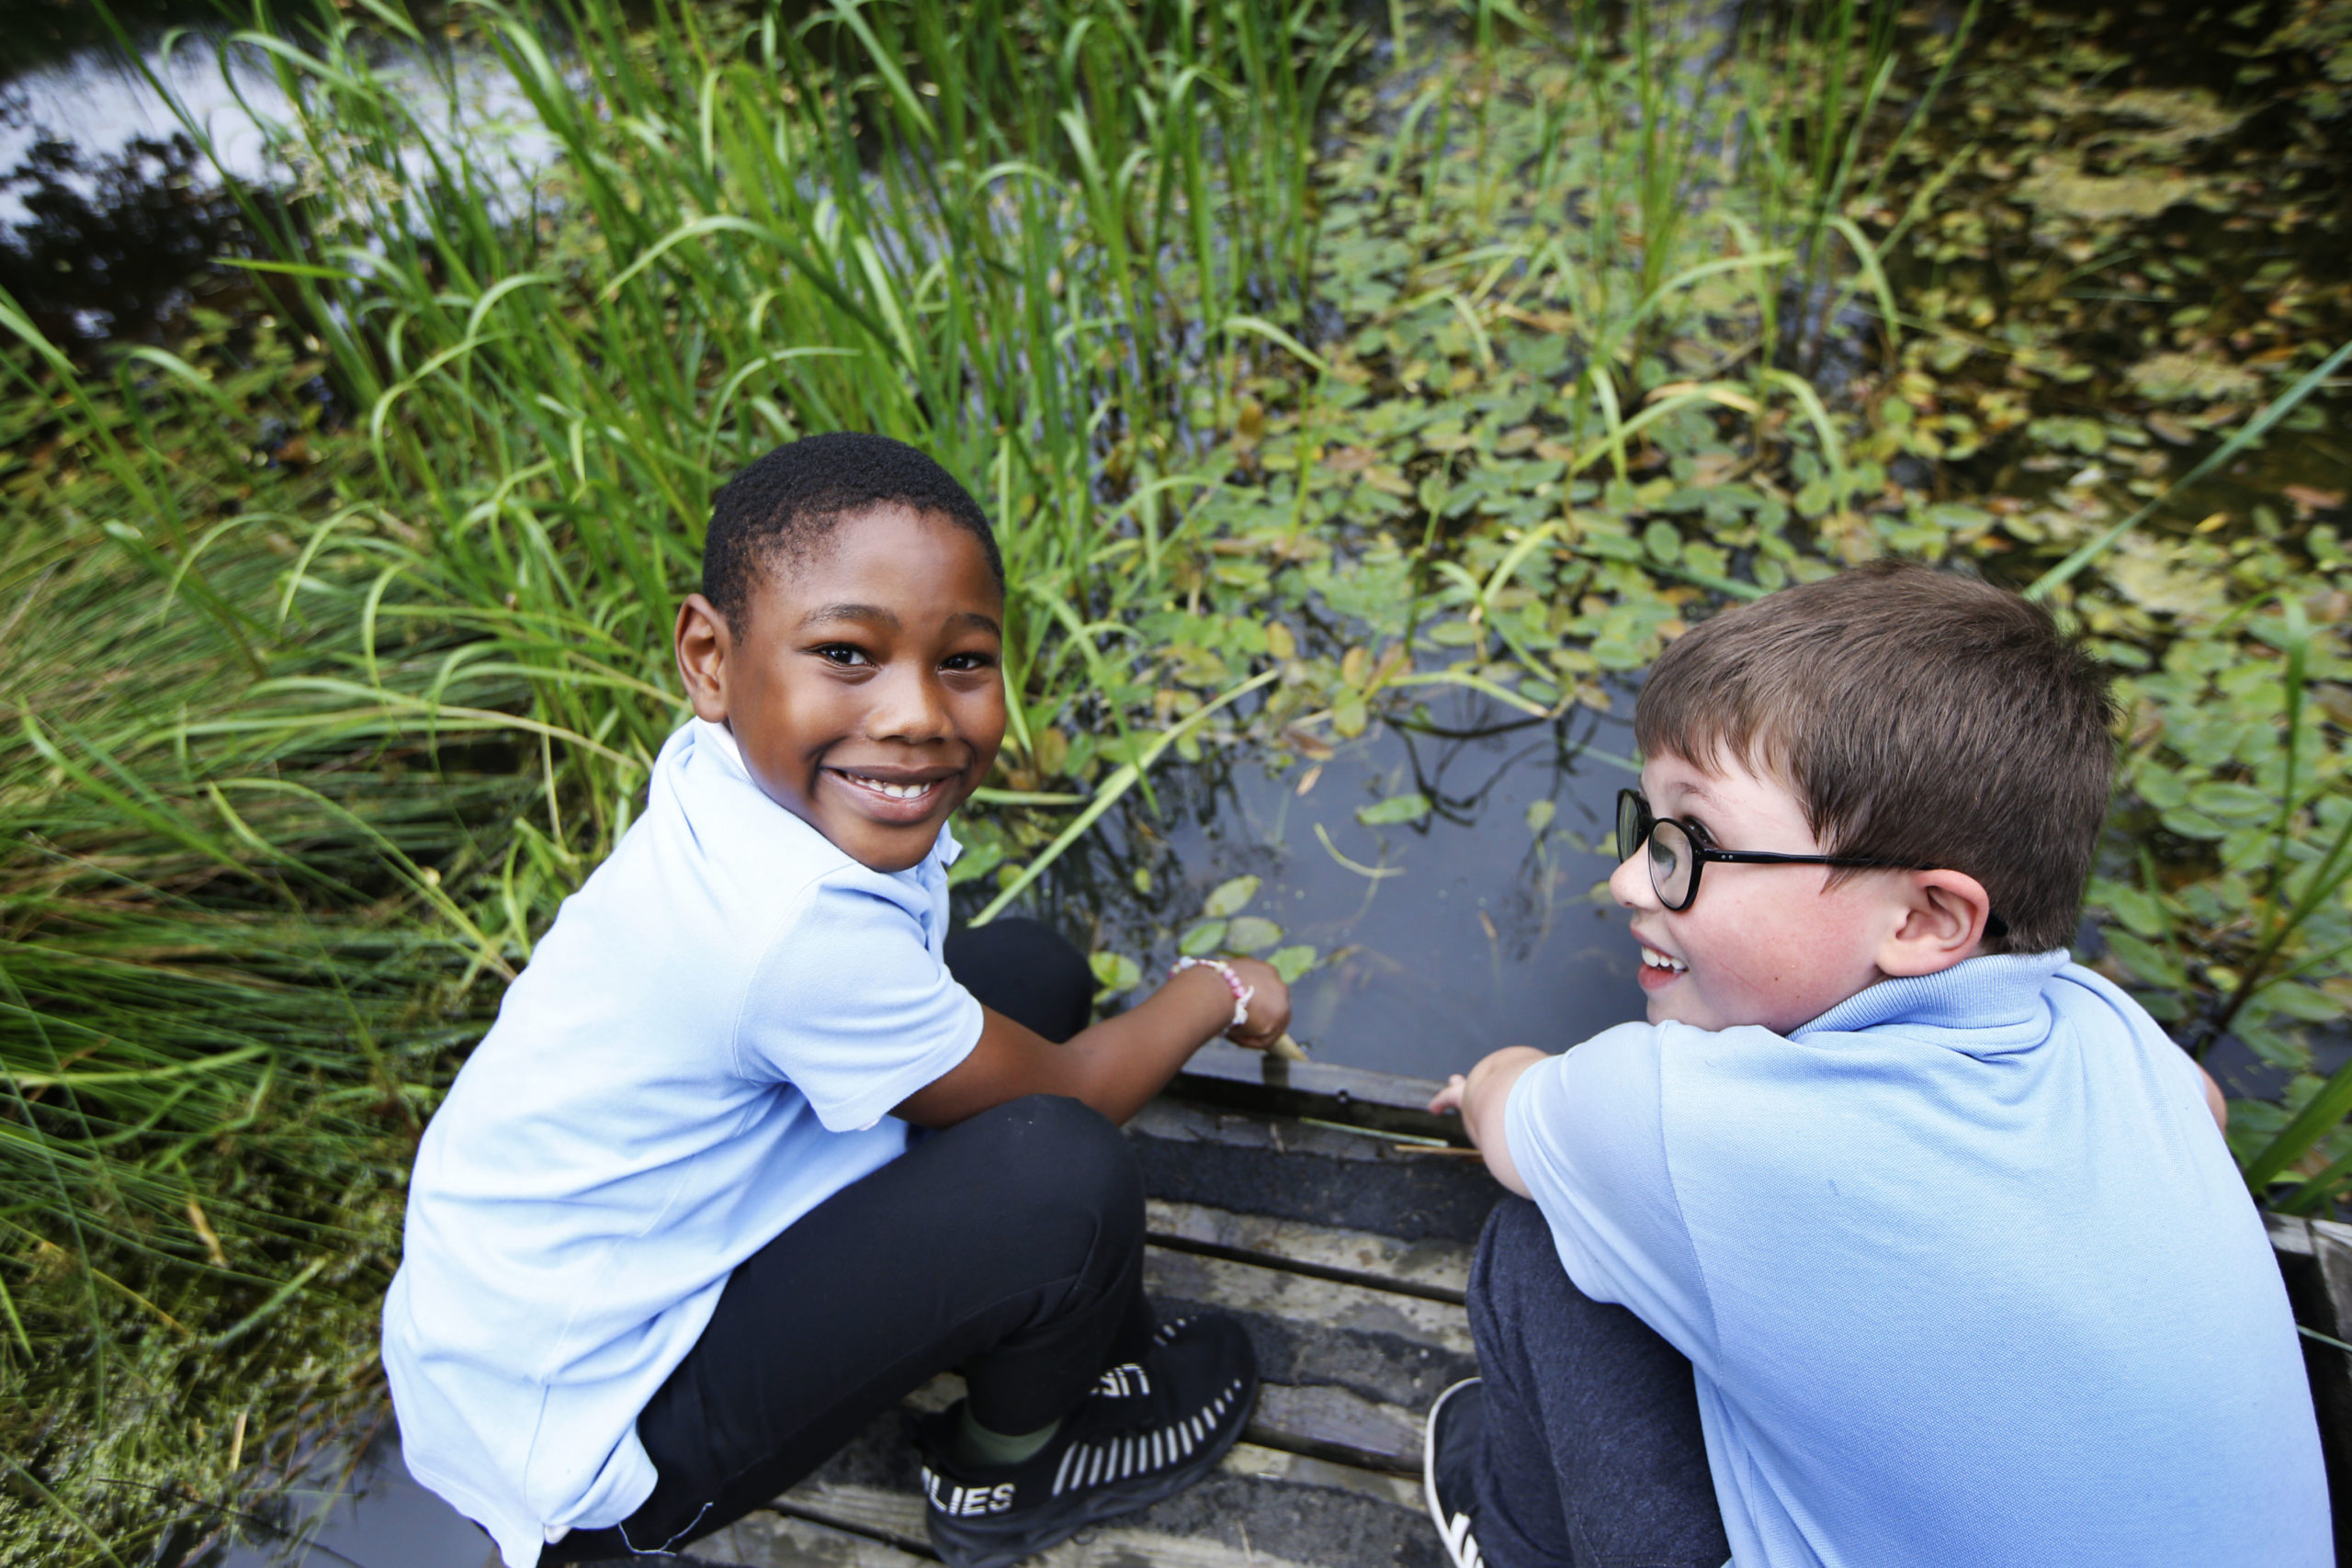 Nature Lab - Pond dipping (ages 5-9)